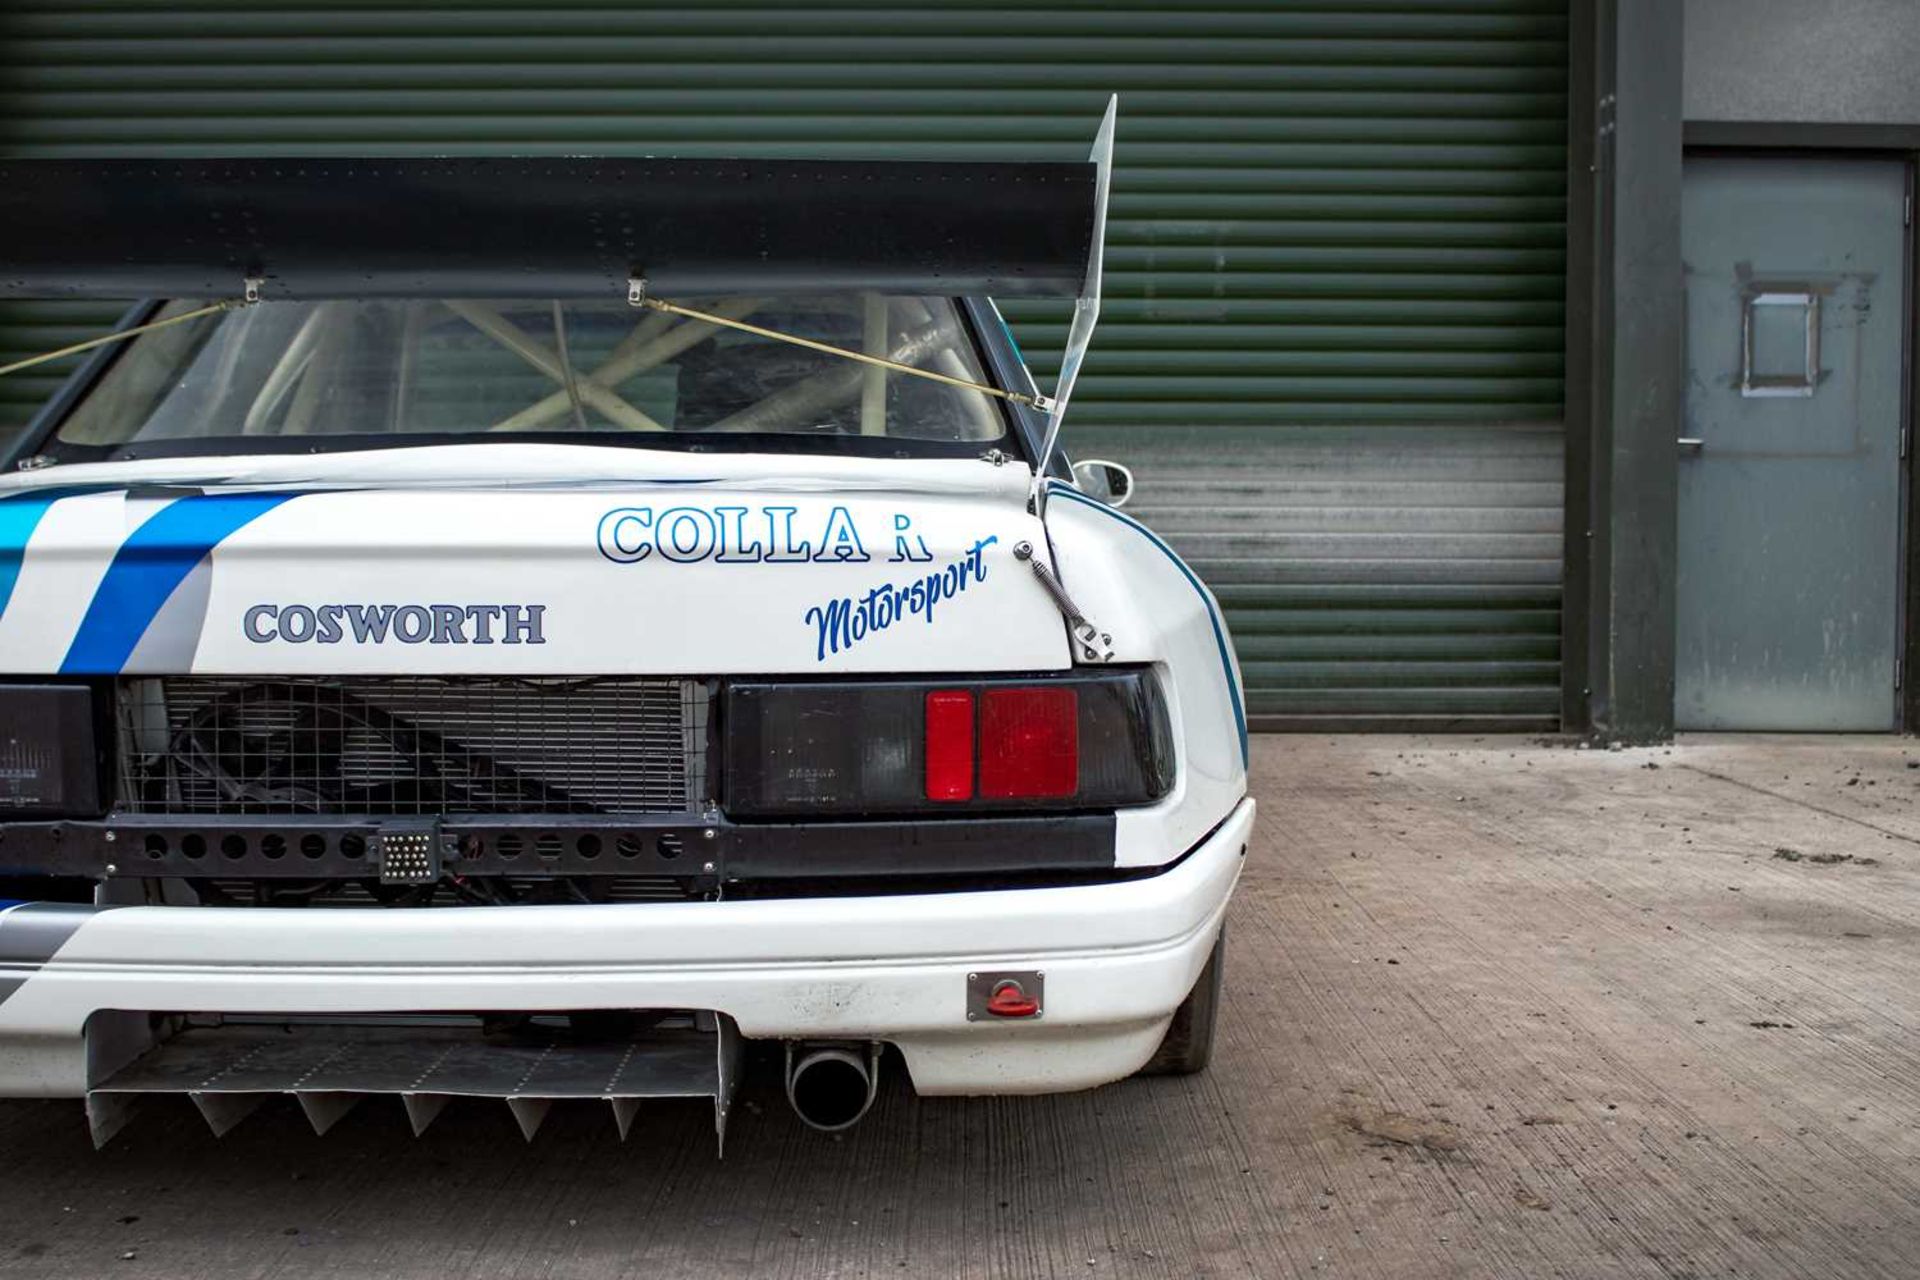 1996 Ford Sierra Cosworth - Image 40 of 100